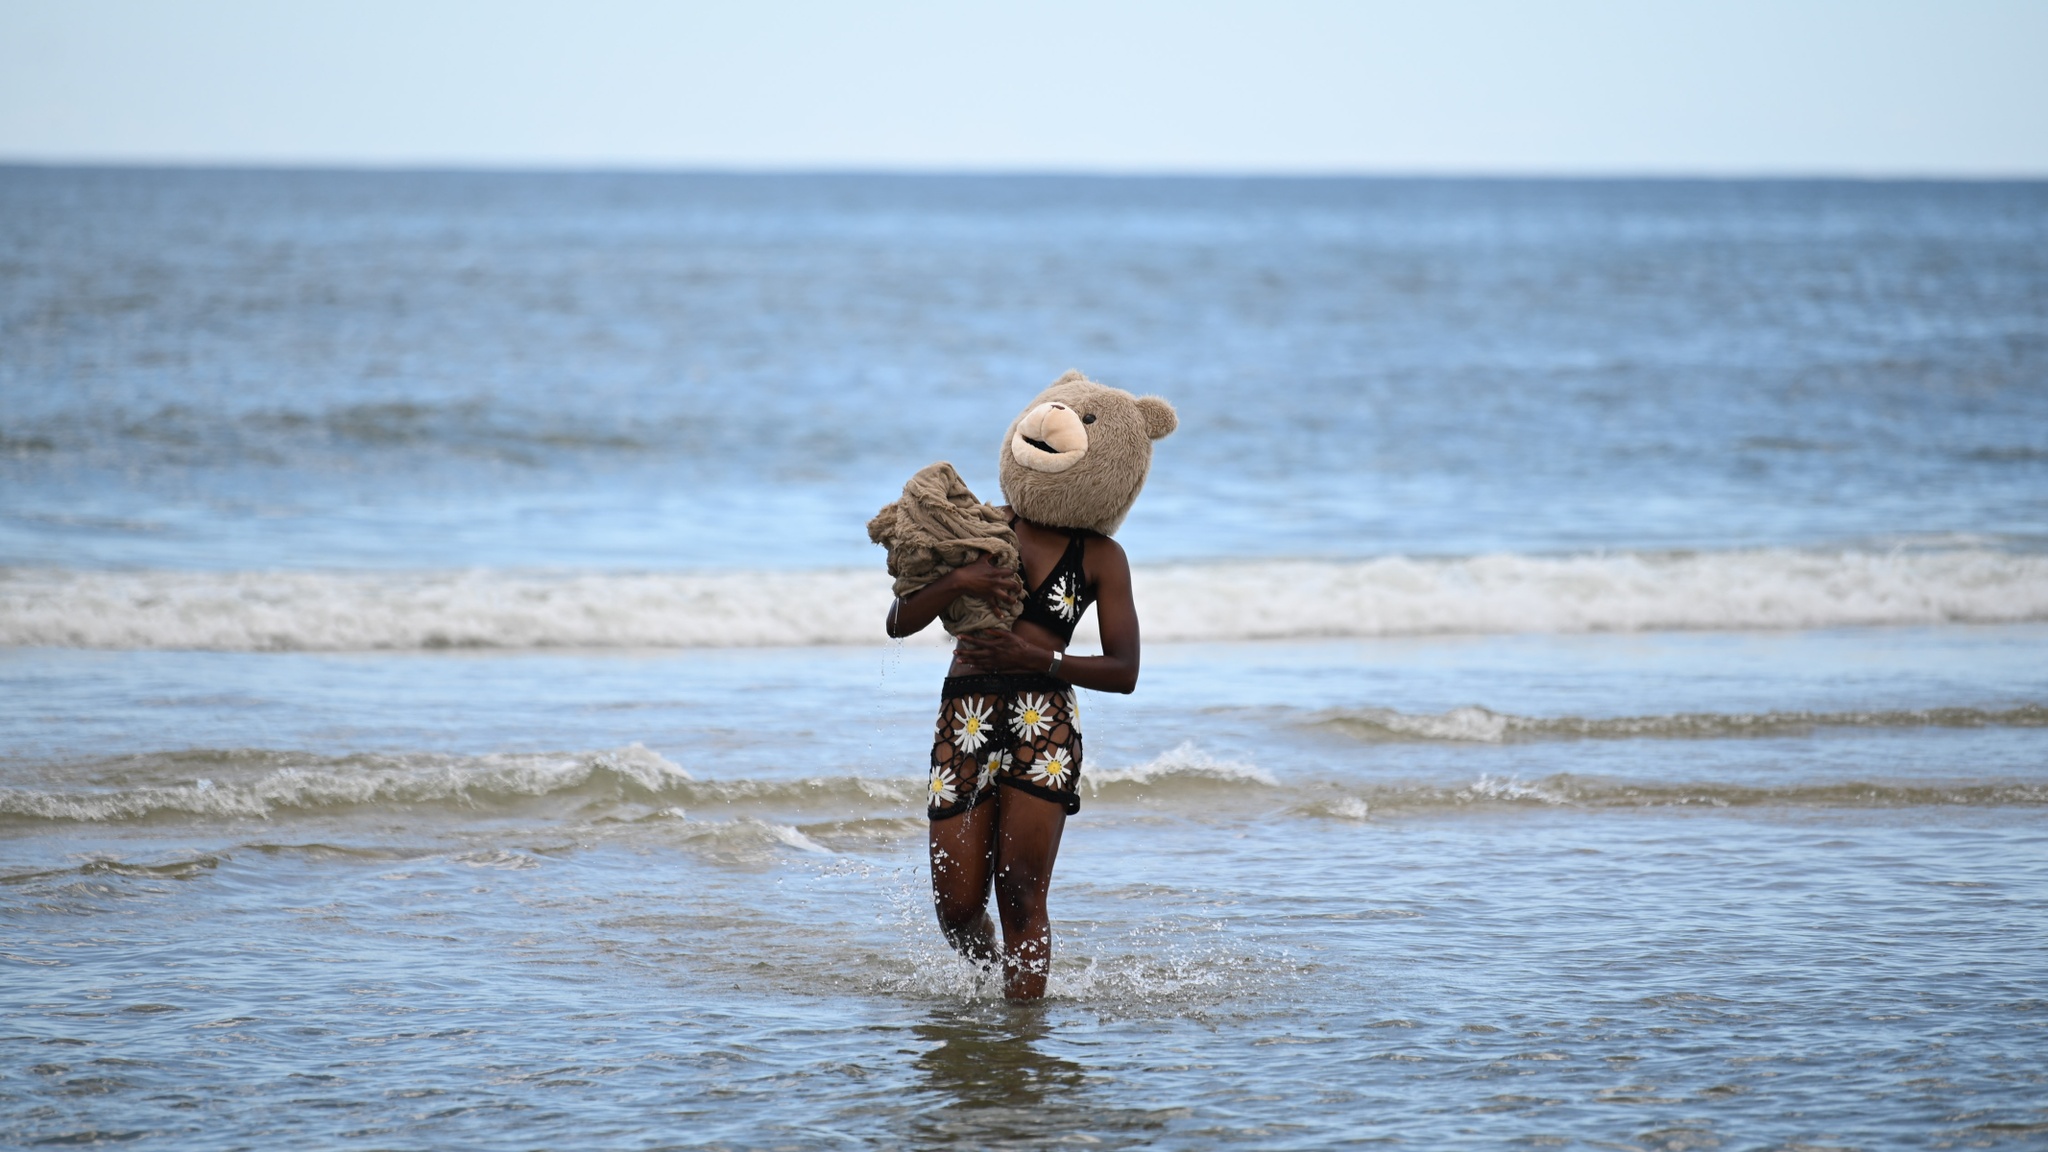 A Black person wearing a crocheted two-piece bathing suit with a yellow daisy design and a brown teddy bear costume head wades in the shallows of an ocean along a beach. They carry a bundle of brown fabric swaddled in their arms.